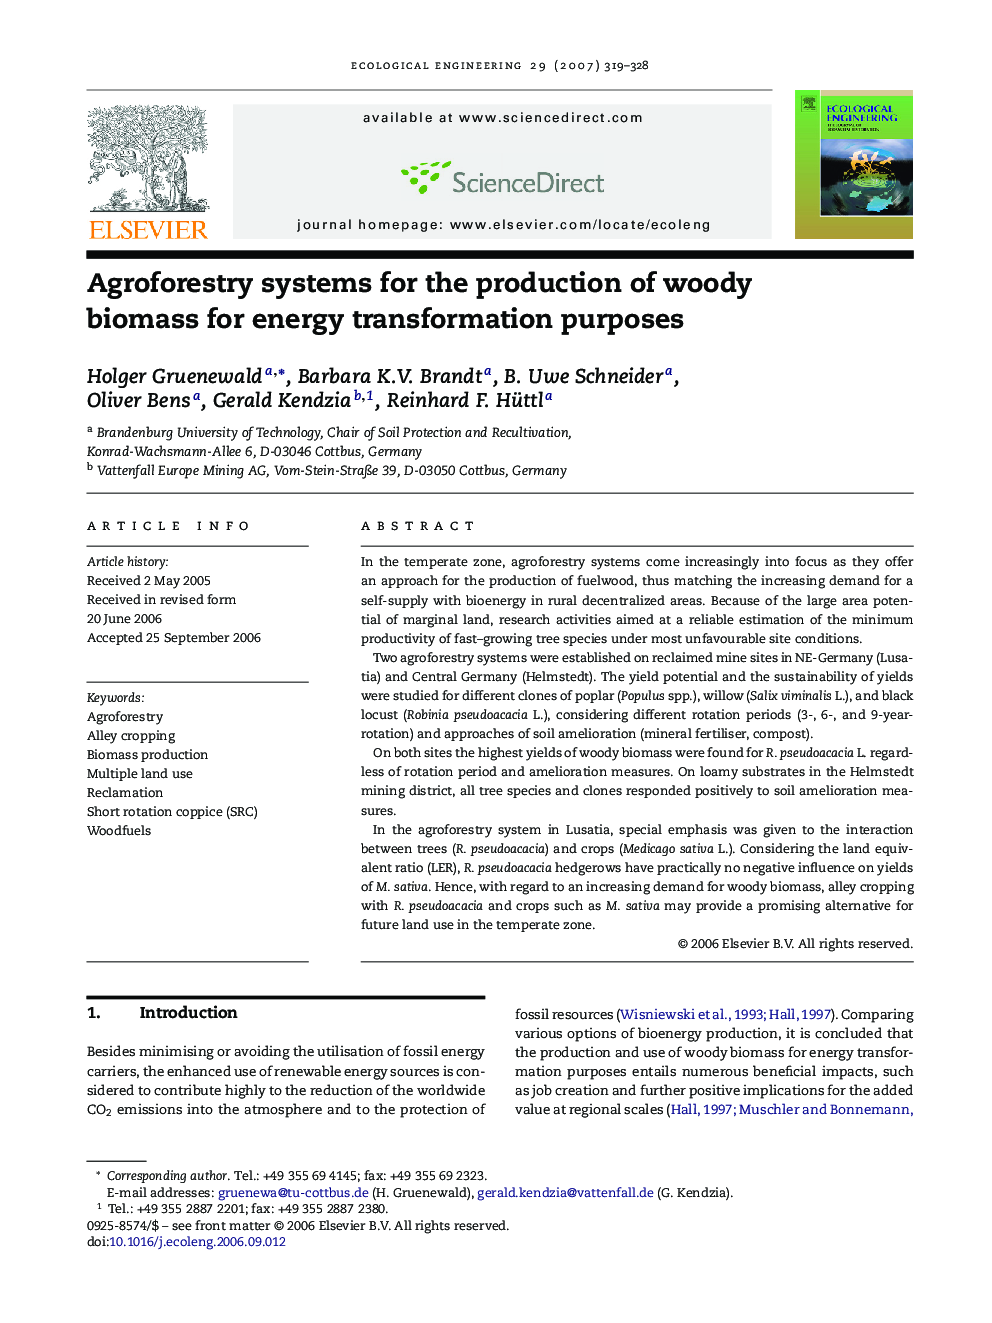 Agroforestry systems for the production of woody biomass for energy transformation purposes